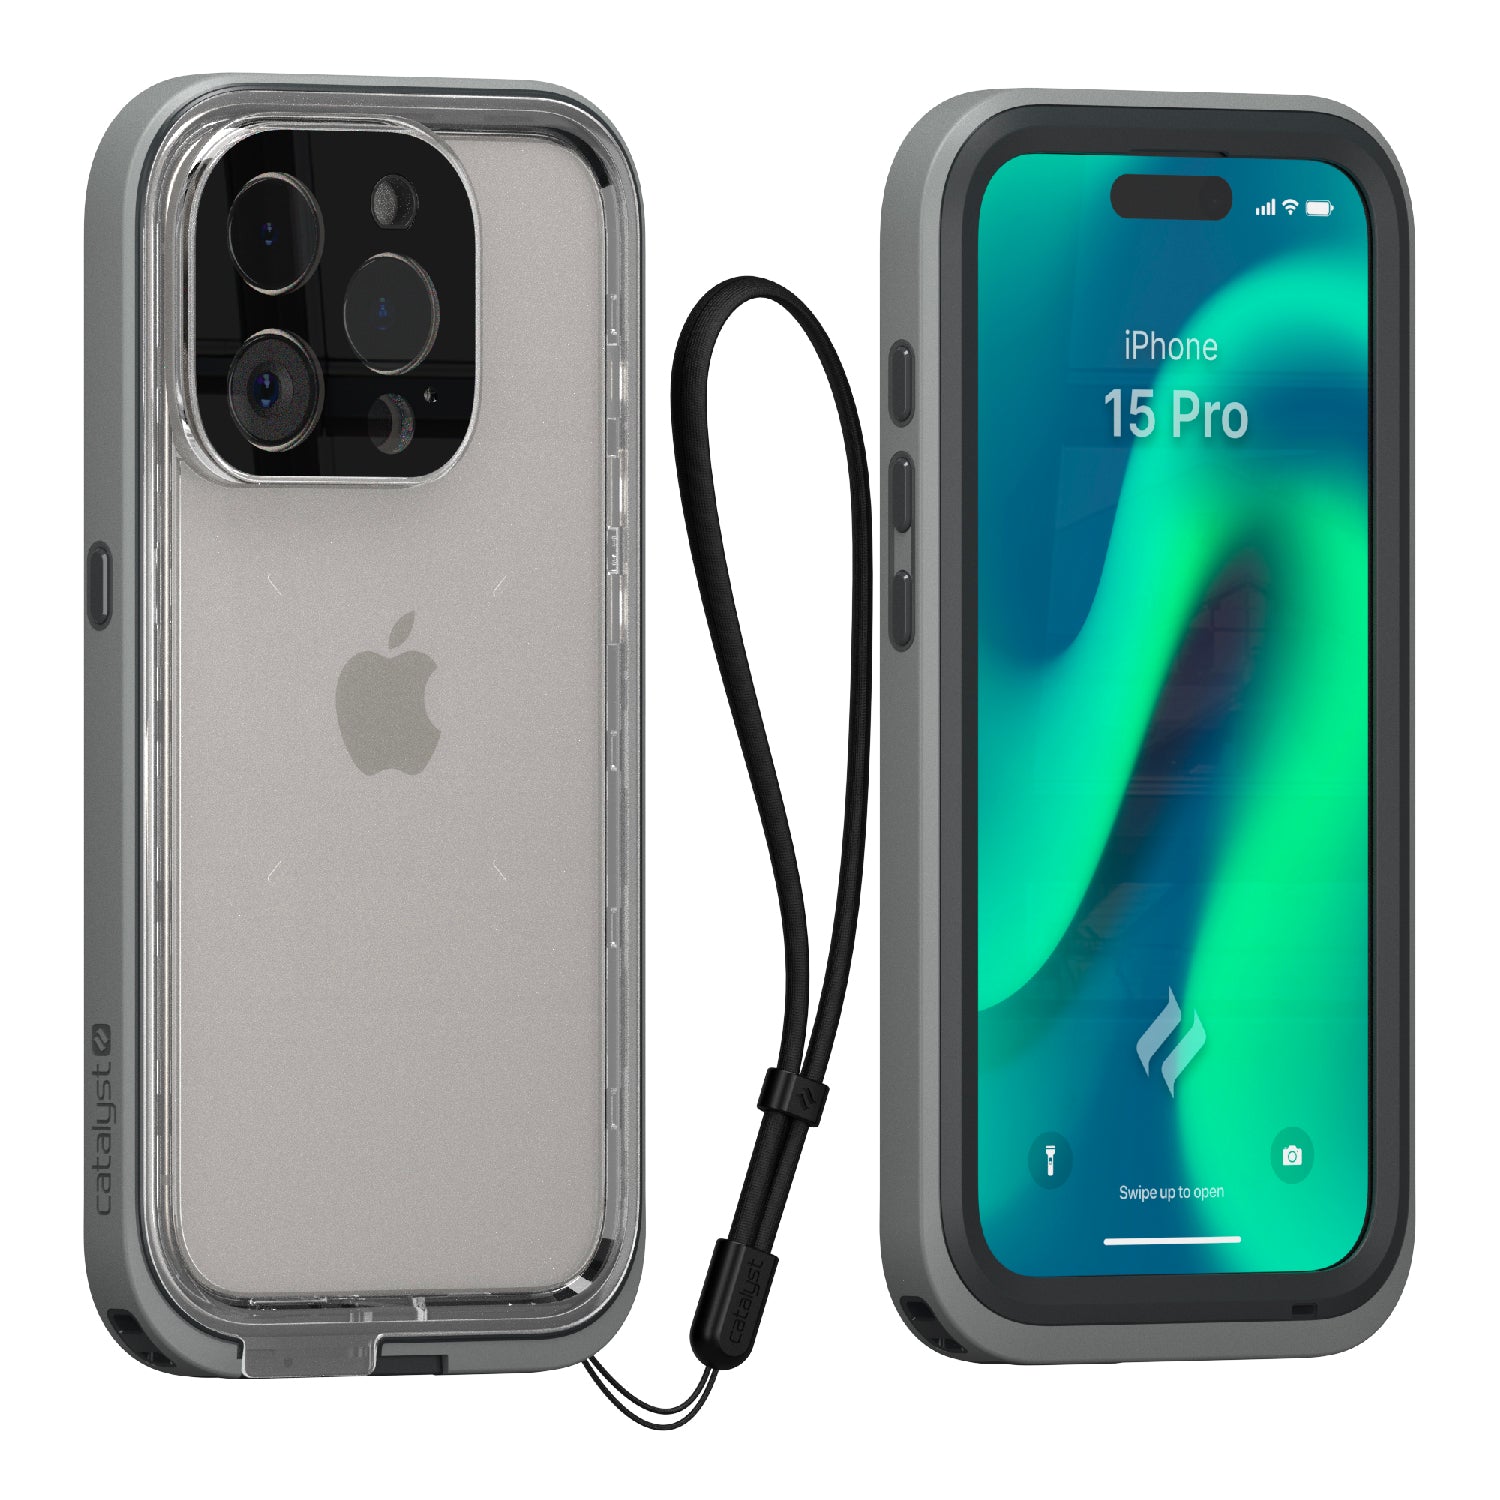 CATALYST LAUNCHES TOTAL PROTECTION CASE FOR IPHONE 12 SERIES